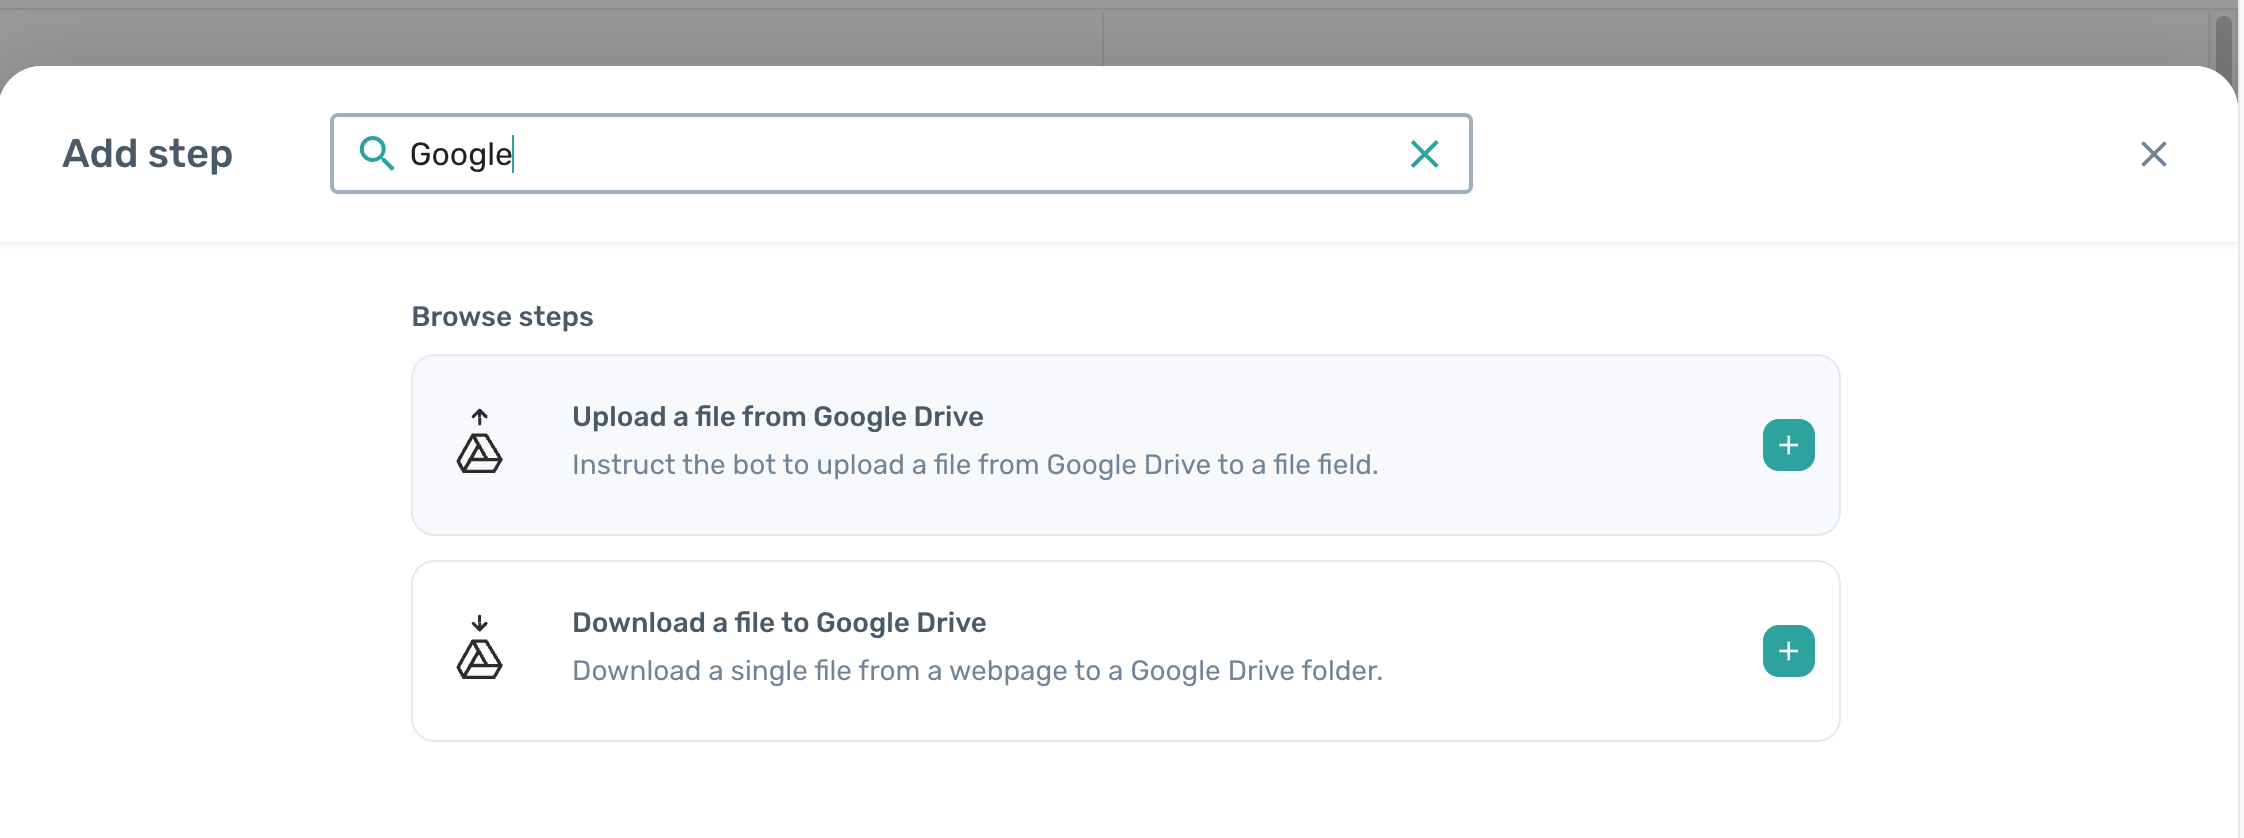 Use Axiom to automate file downloads and uploads to Google Drive